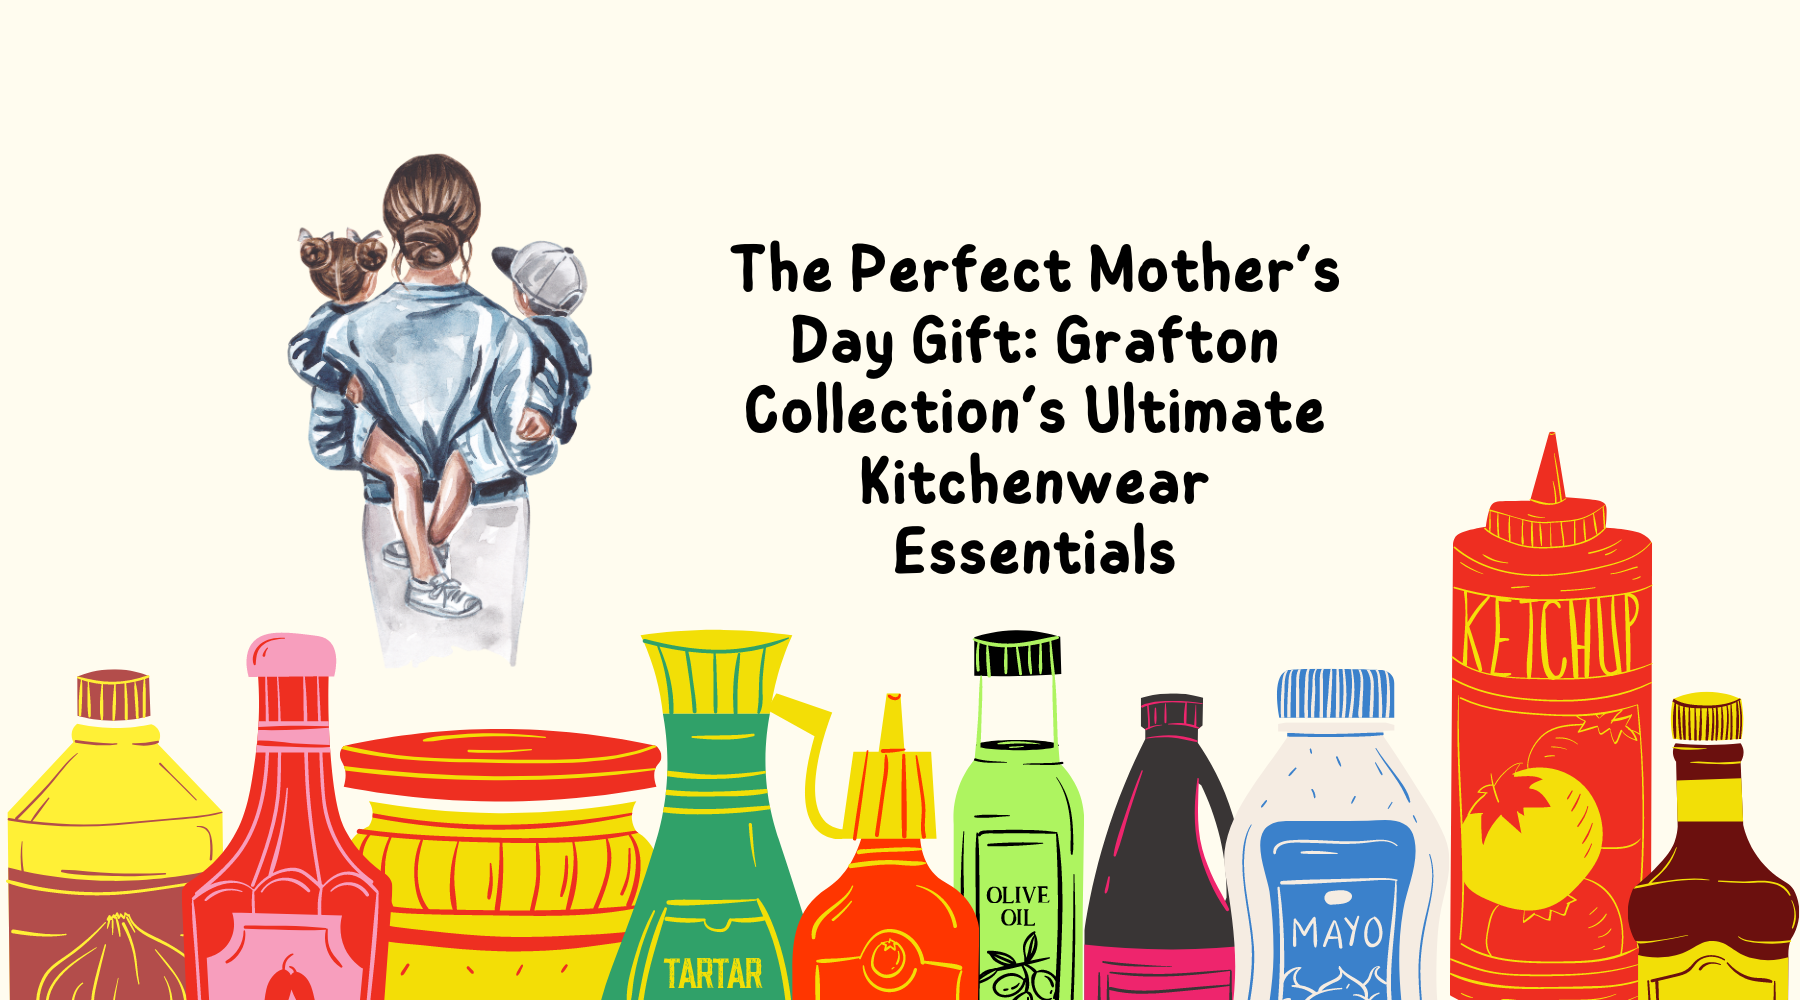 The Perfect Mother’s Day Gift: Grafton Collection’s Ultimate Kitchenwear Essentials